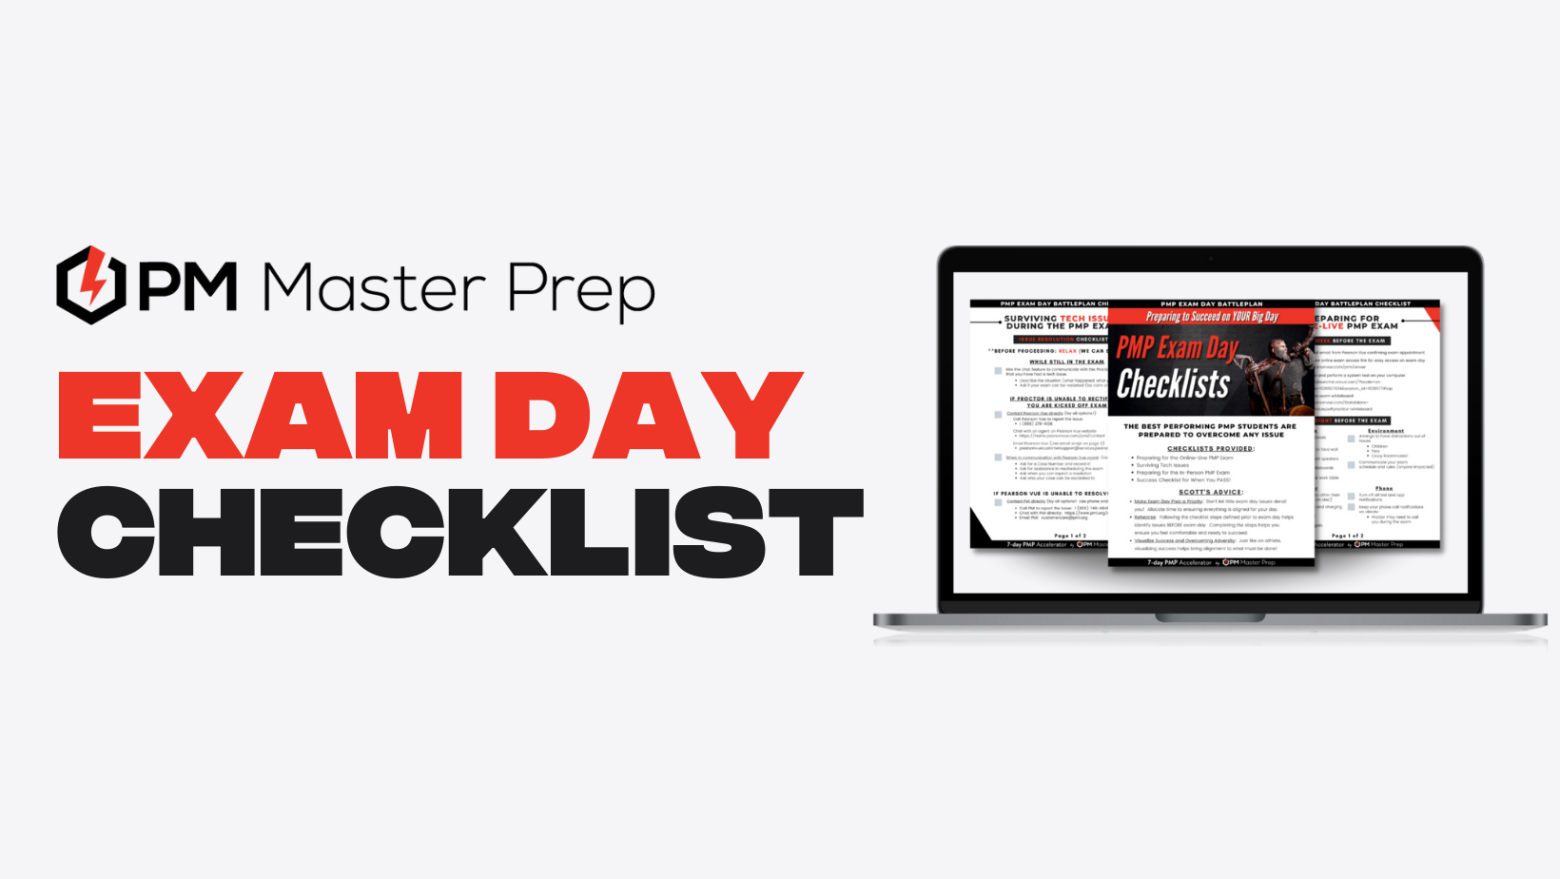 PM Master Prep Exam Day Checklist to ensure you're 100% ready to pass the PMP Exam.